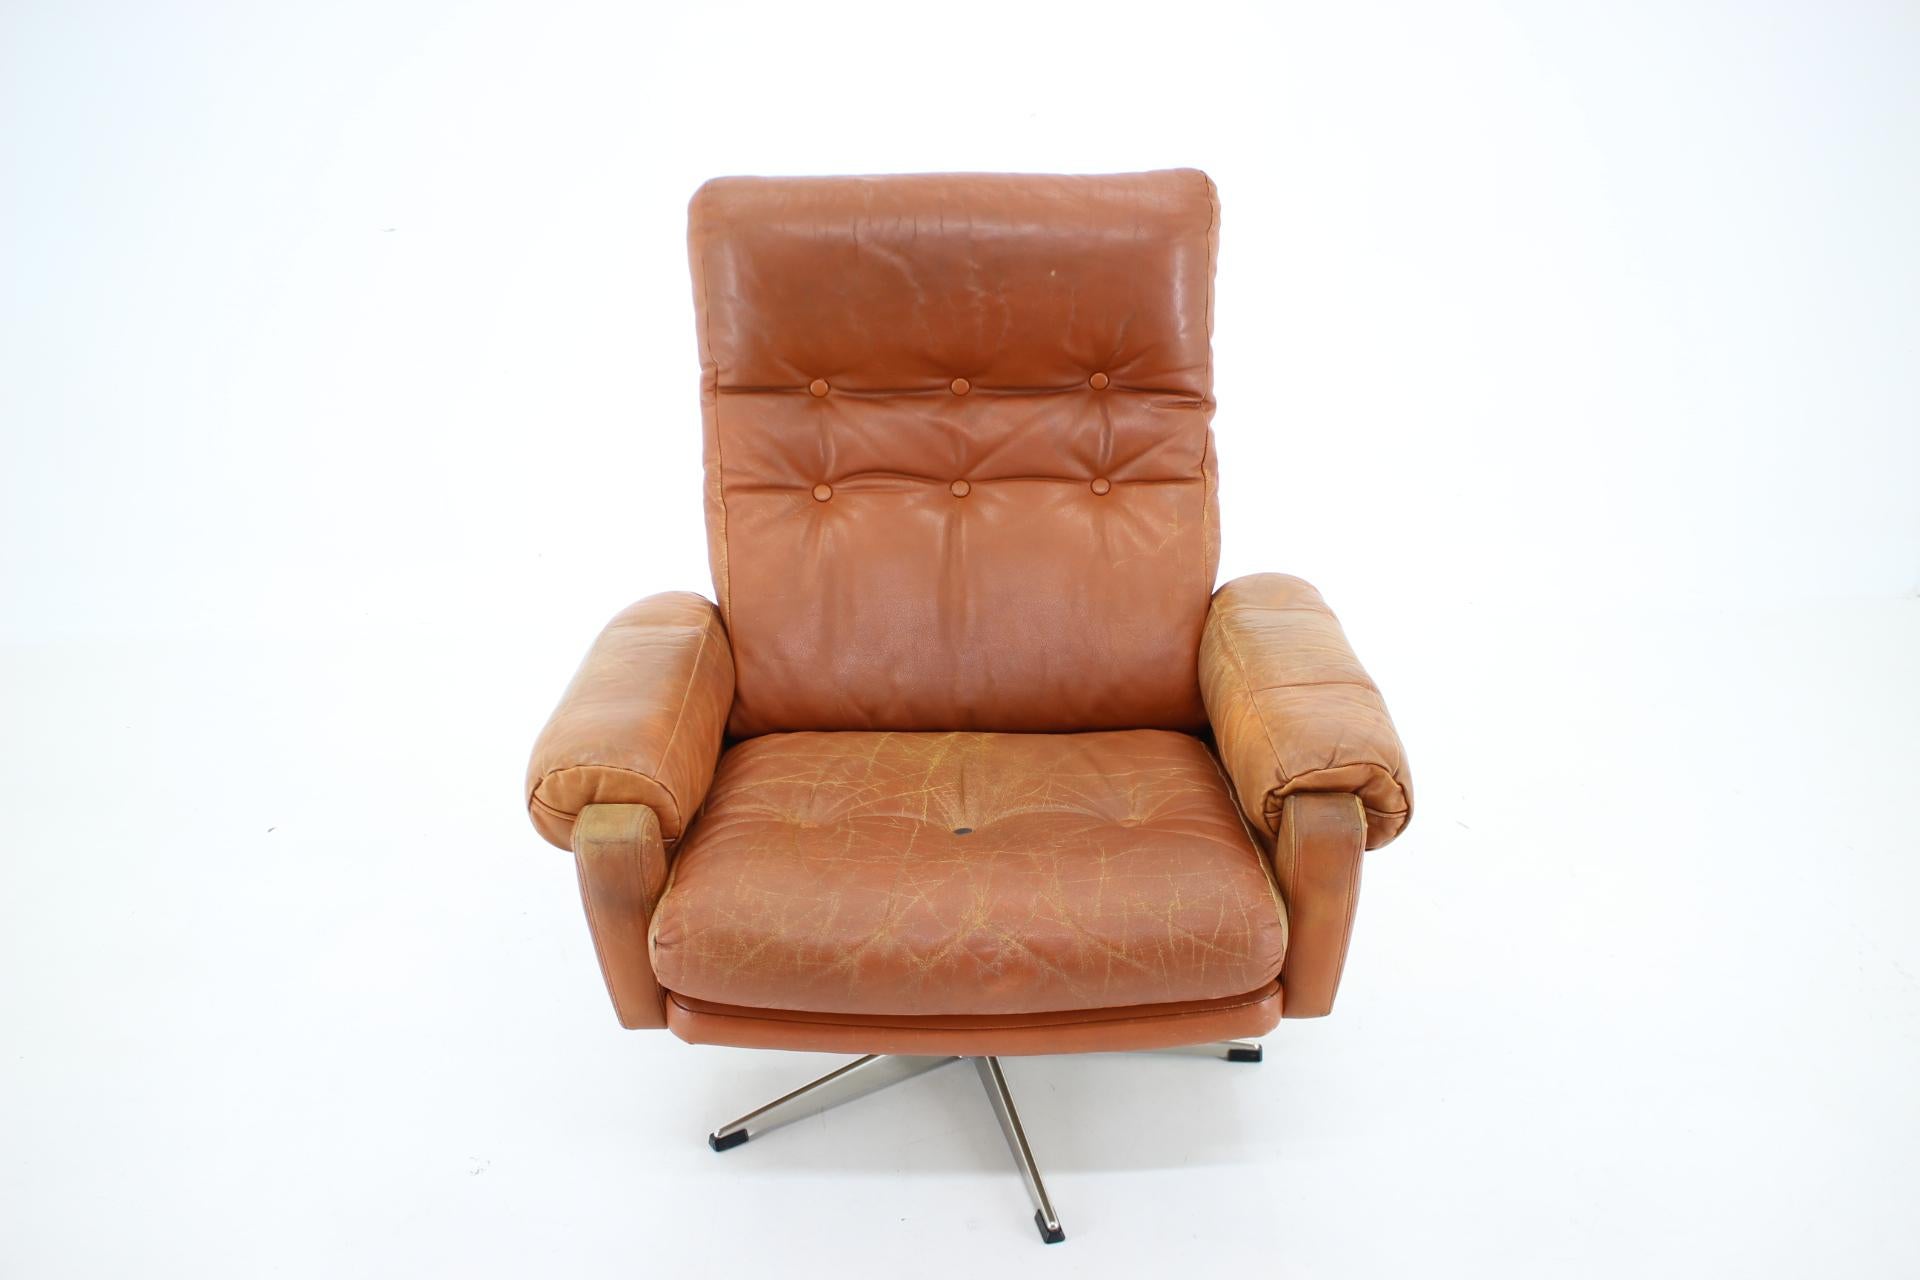 - good original condition with signs of use 
- leather with signs of use due to age
- height of seat 42 cm.